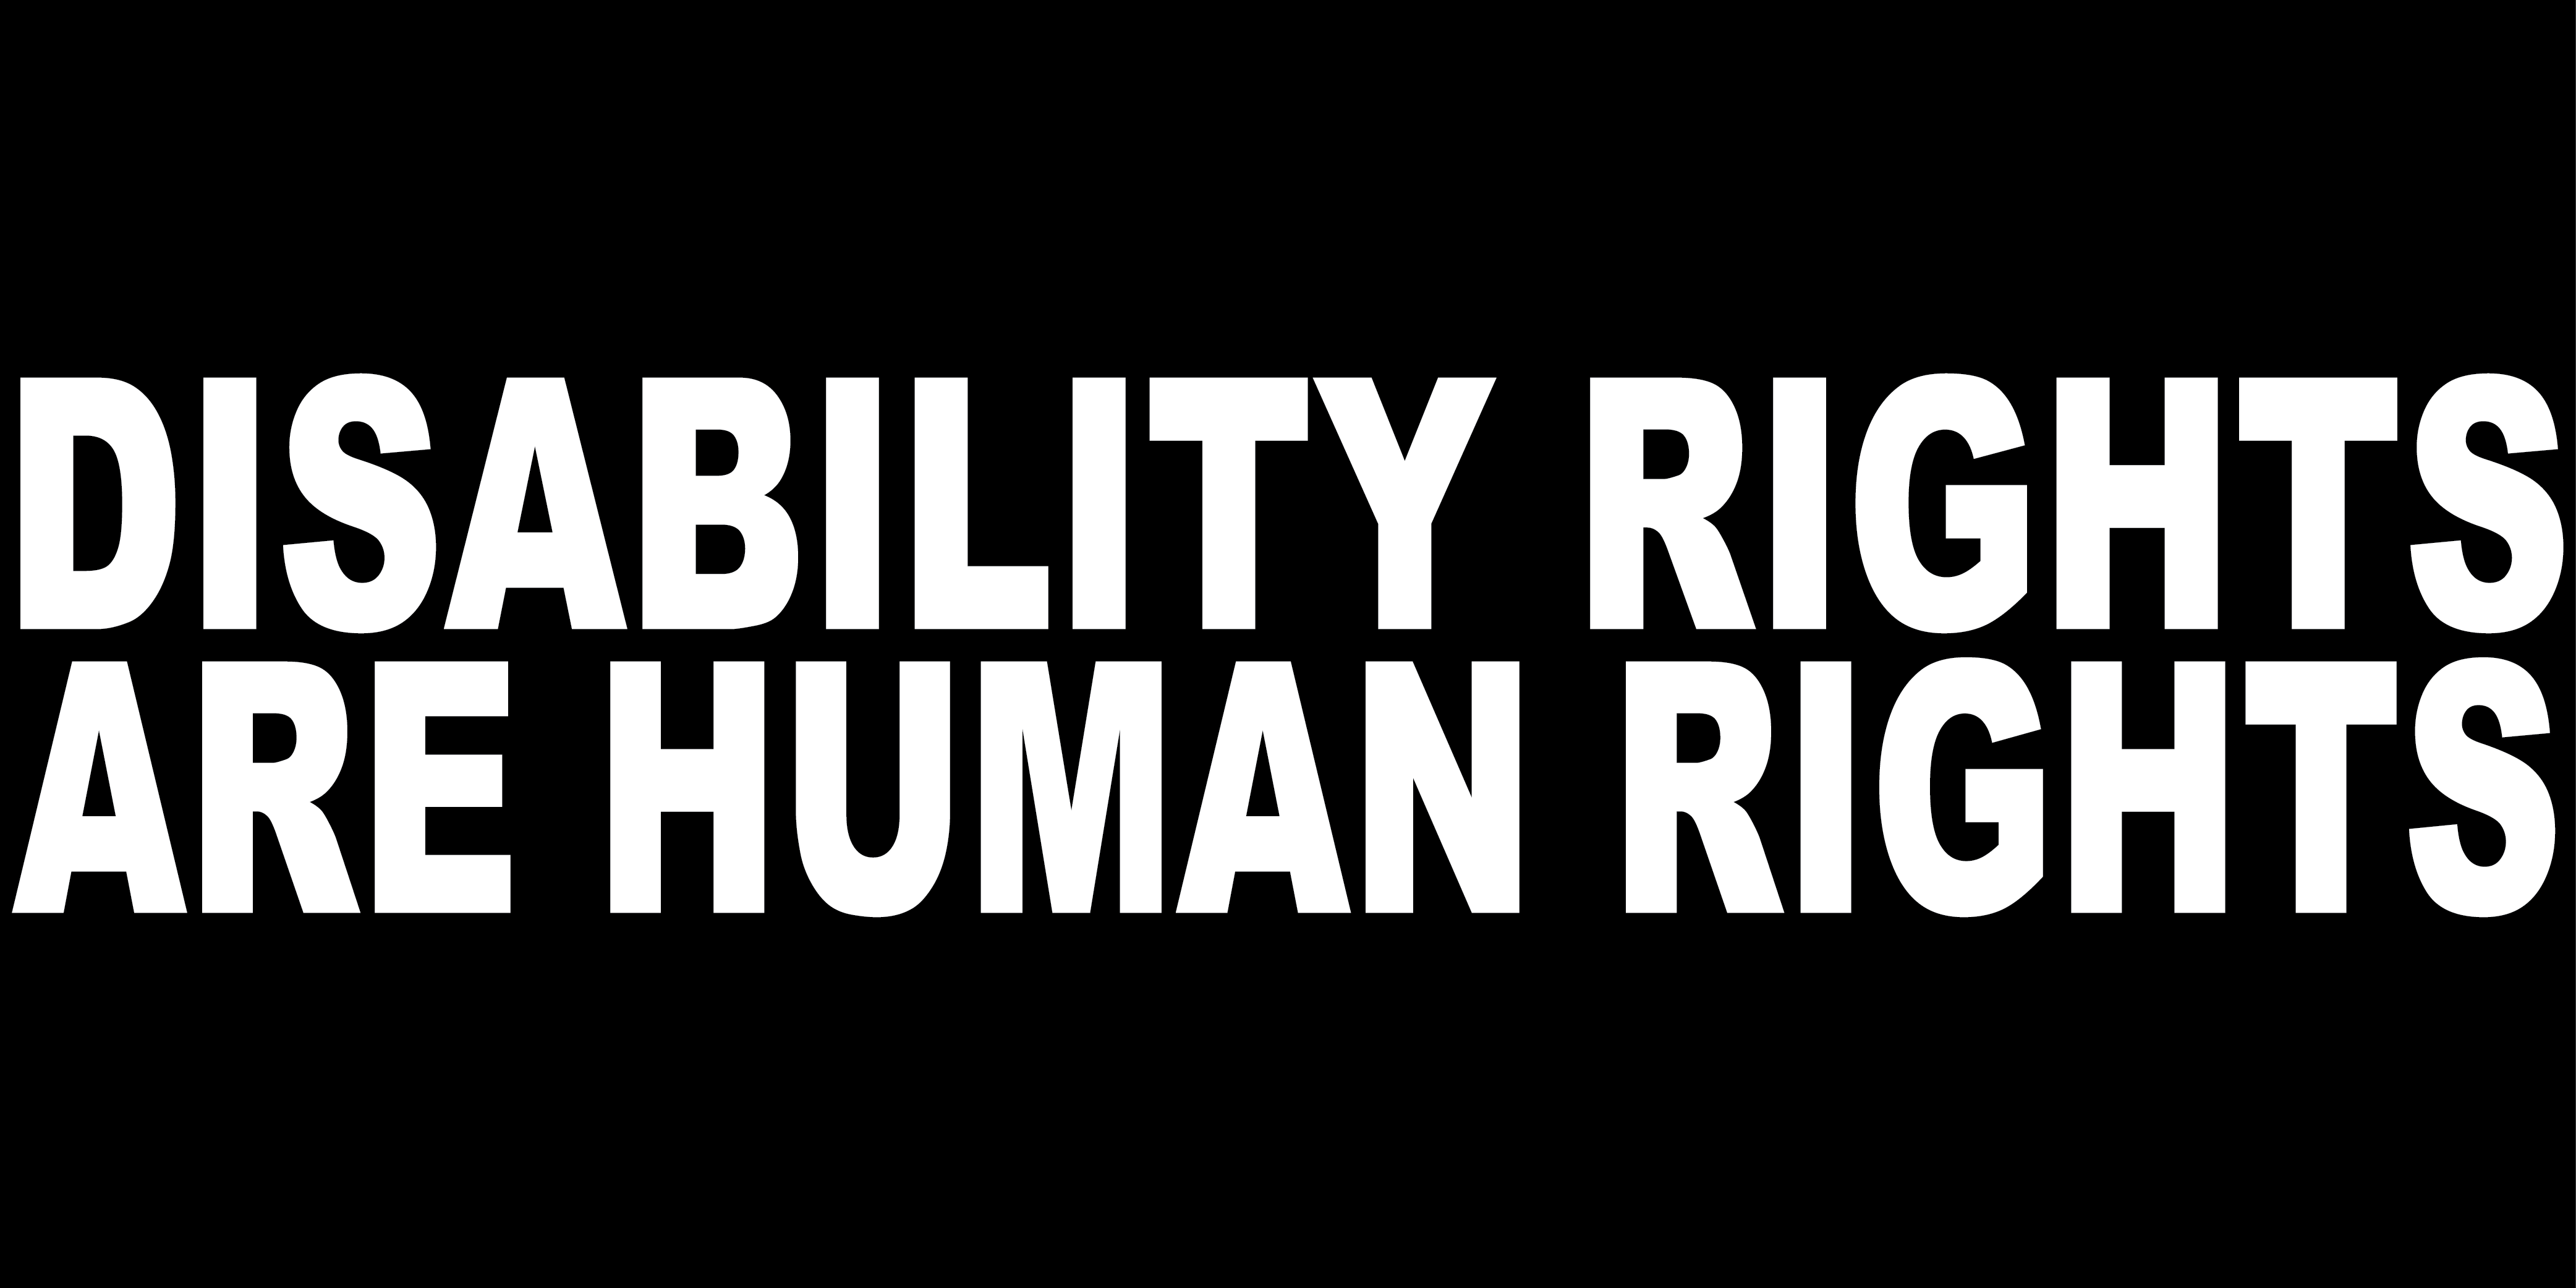 DISABILITY RIGHTS ARE HUMAN RIGHTS